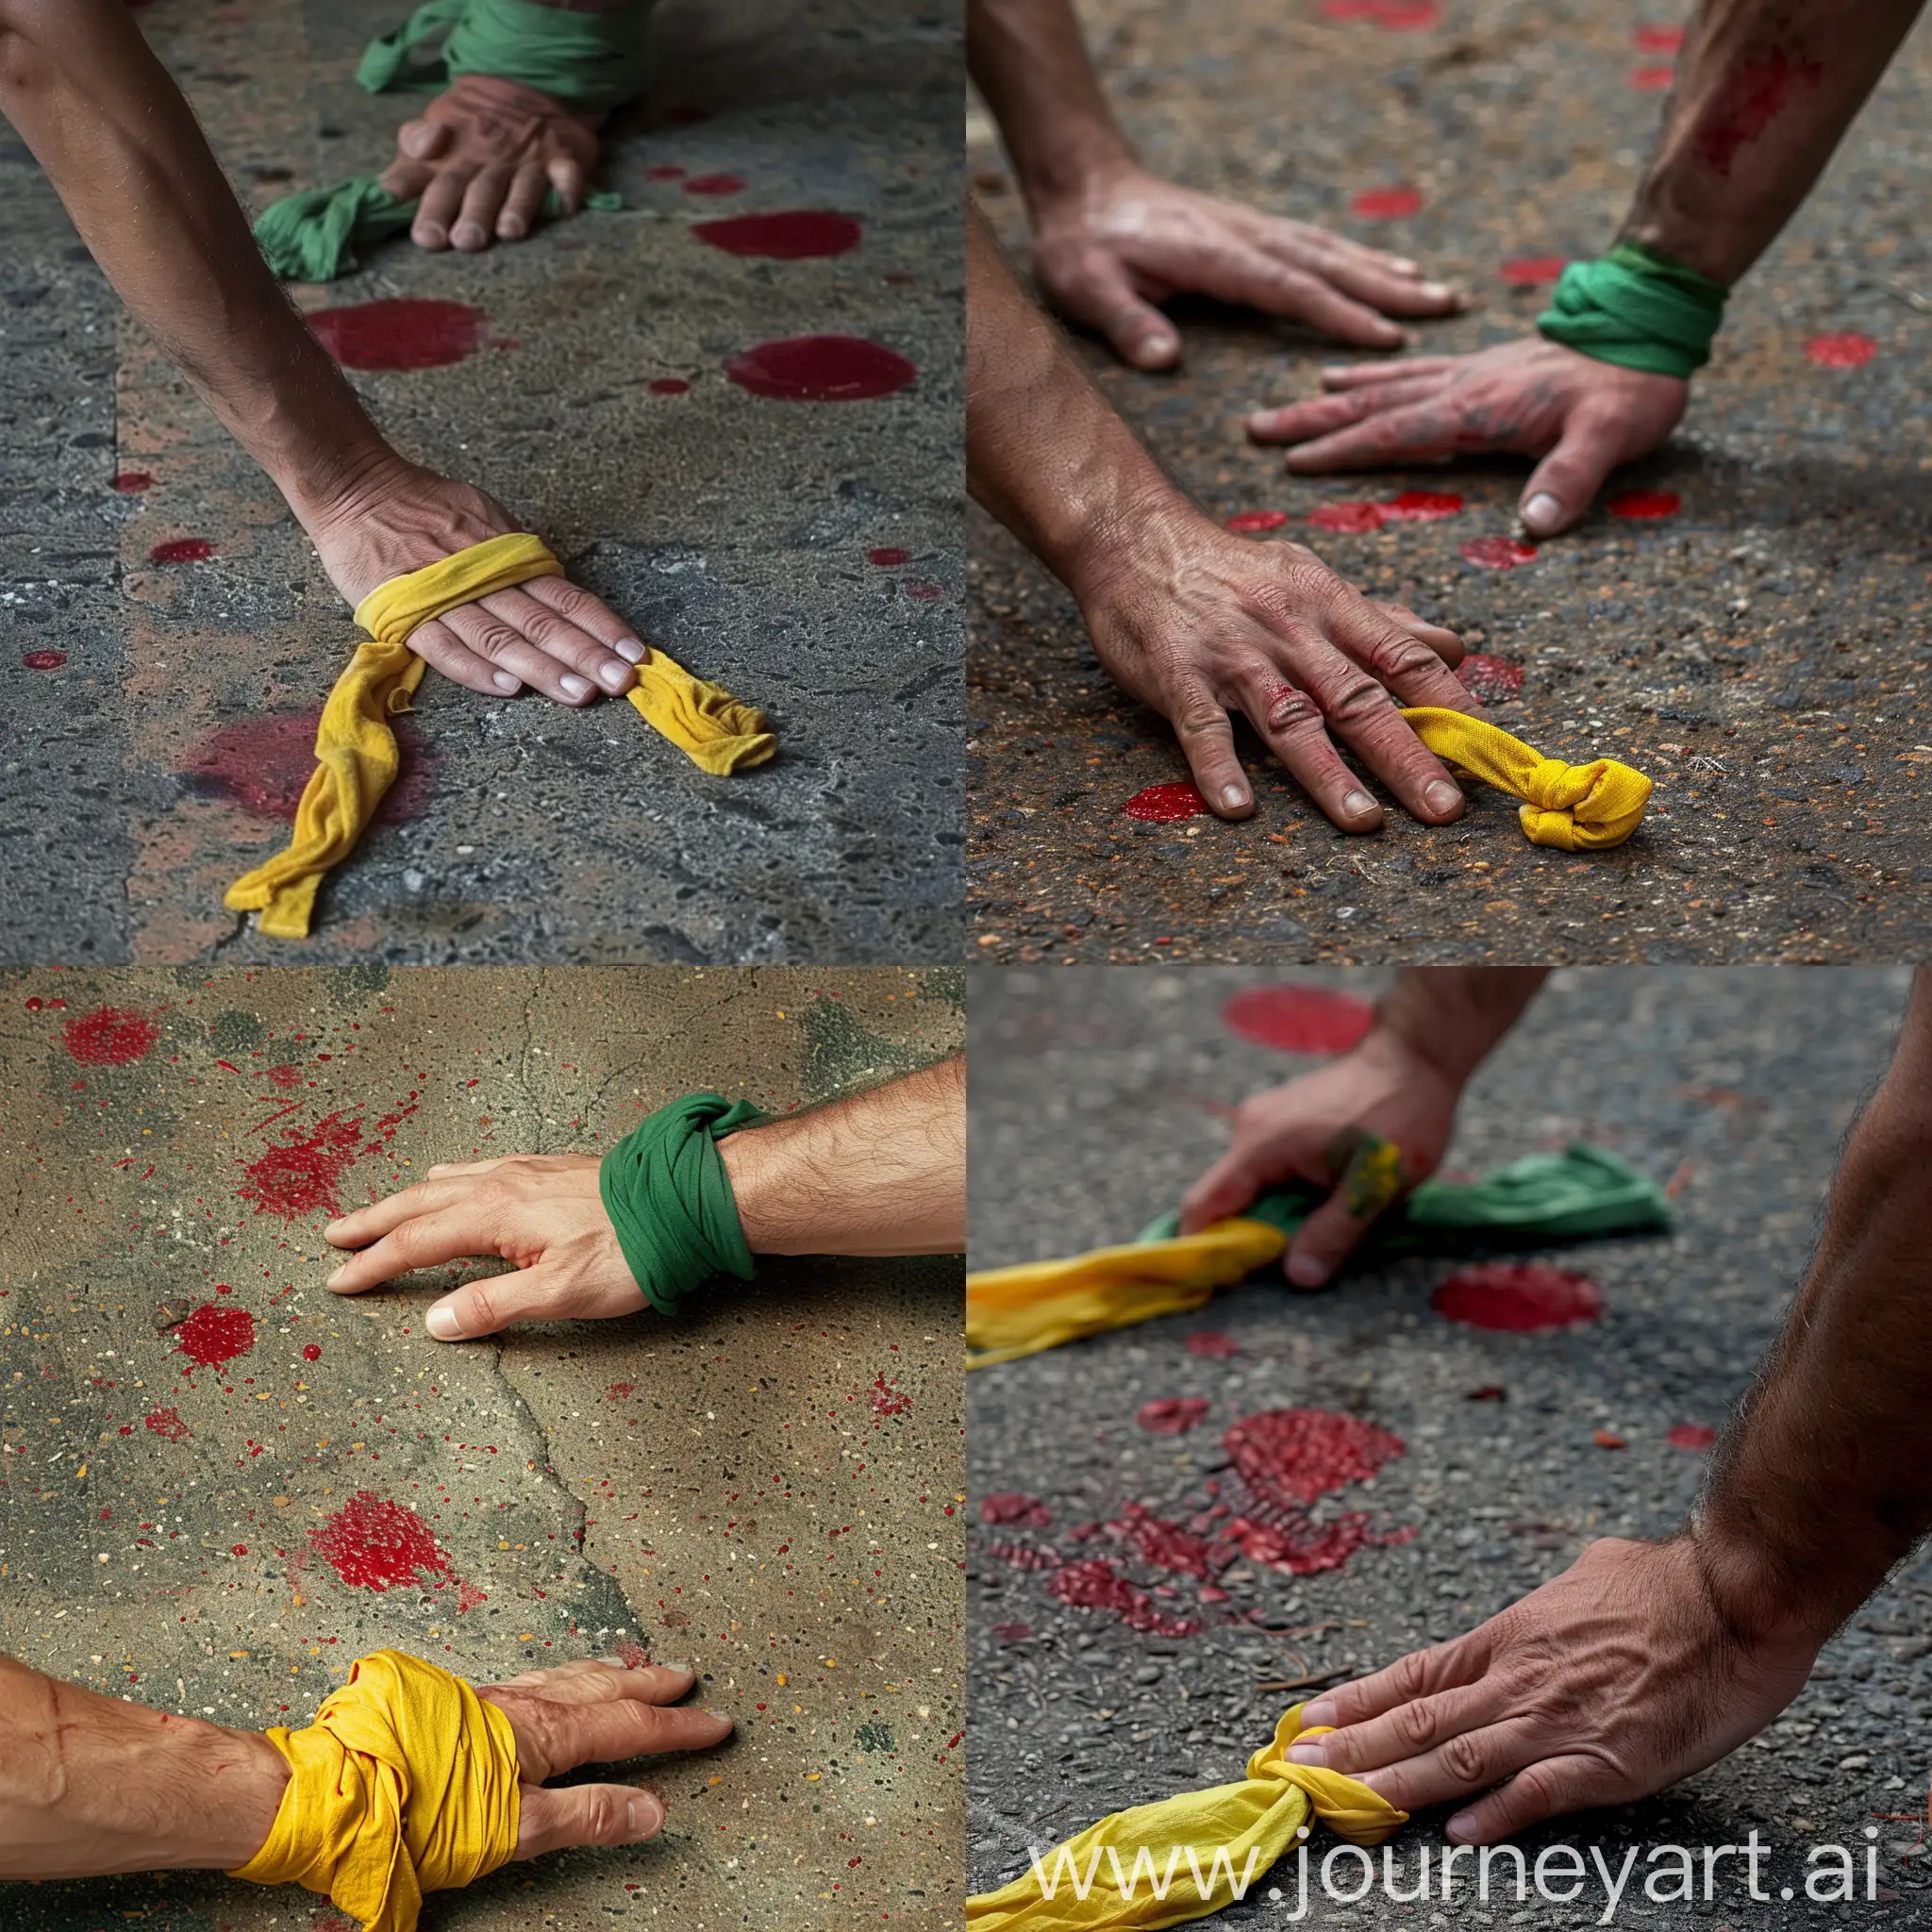 On the asphalt floor, at the bottom there is a man's hand at the joint with a yellow cloth band tied, at the top there is another man's hand with a green cloth band tied at the joint.  On the ground there are red spots.